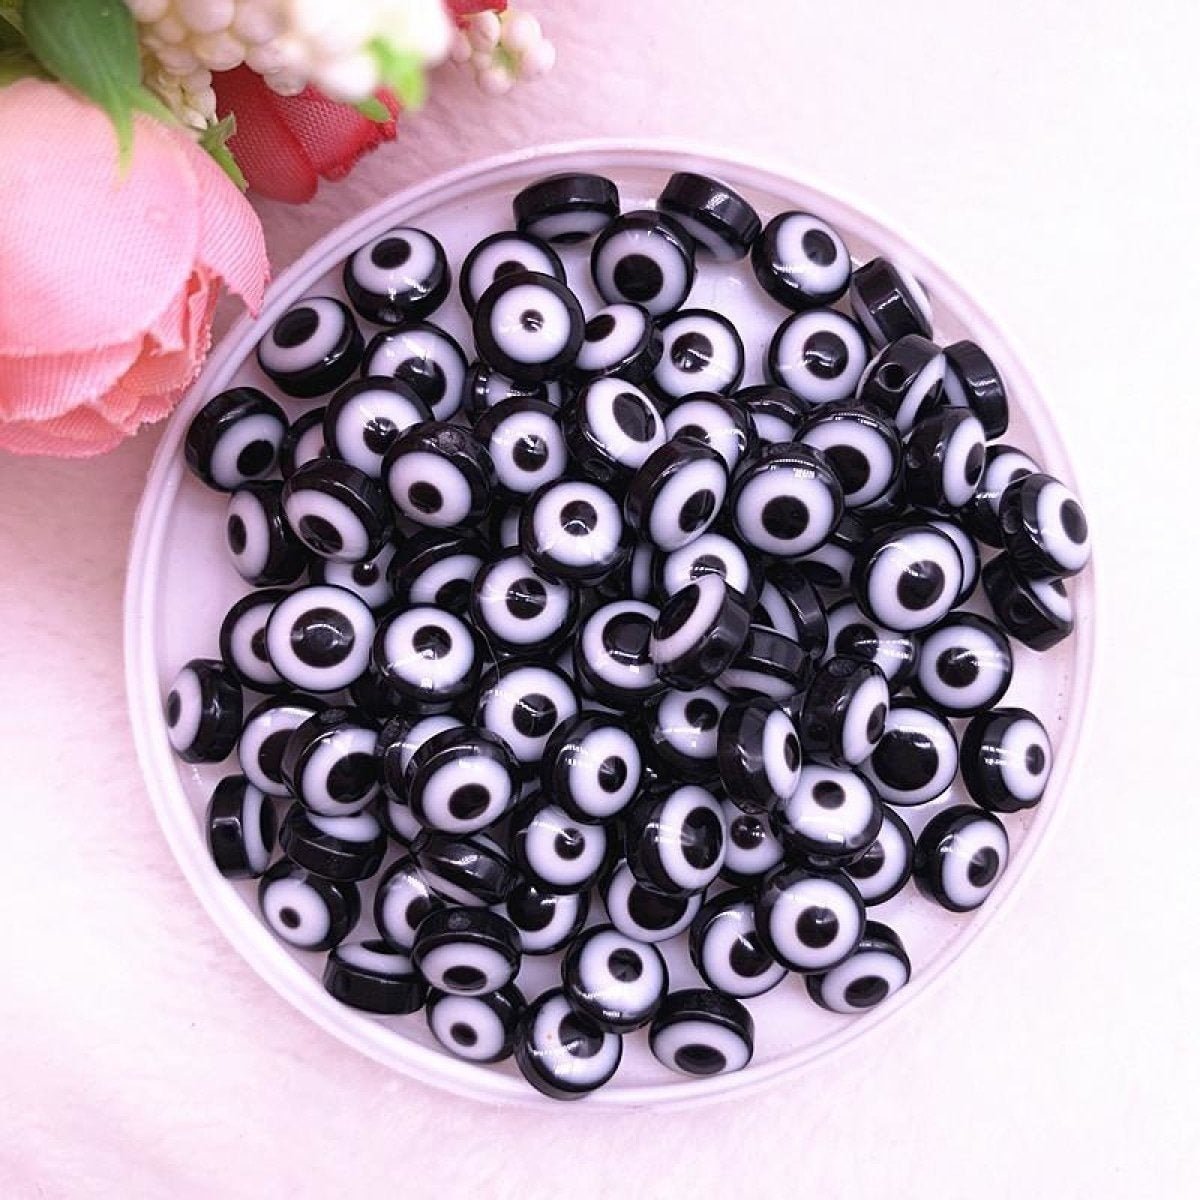 48pcs 8/10mm Resin Spacer Beads Double Sided Eyes for Jewellery Making DIY Bracelet Beads Flat Backed - Black 8mm - - Asia Sell